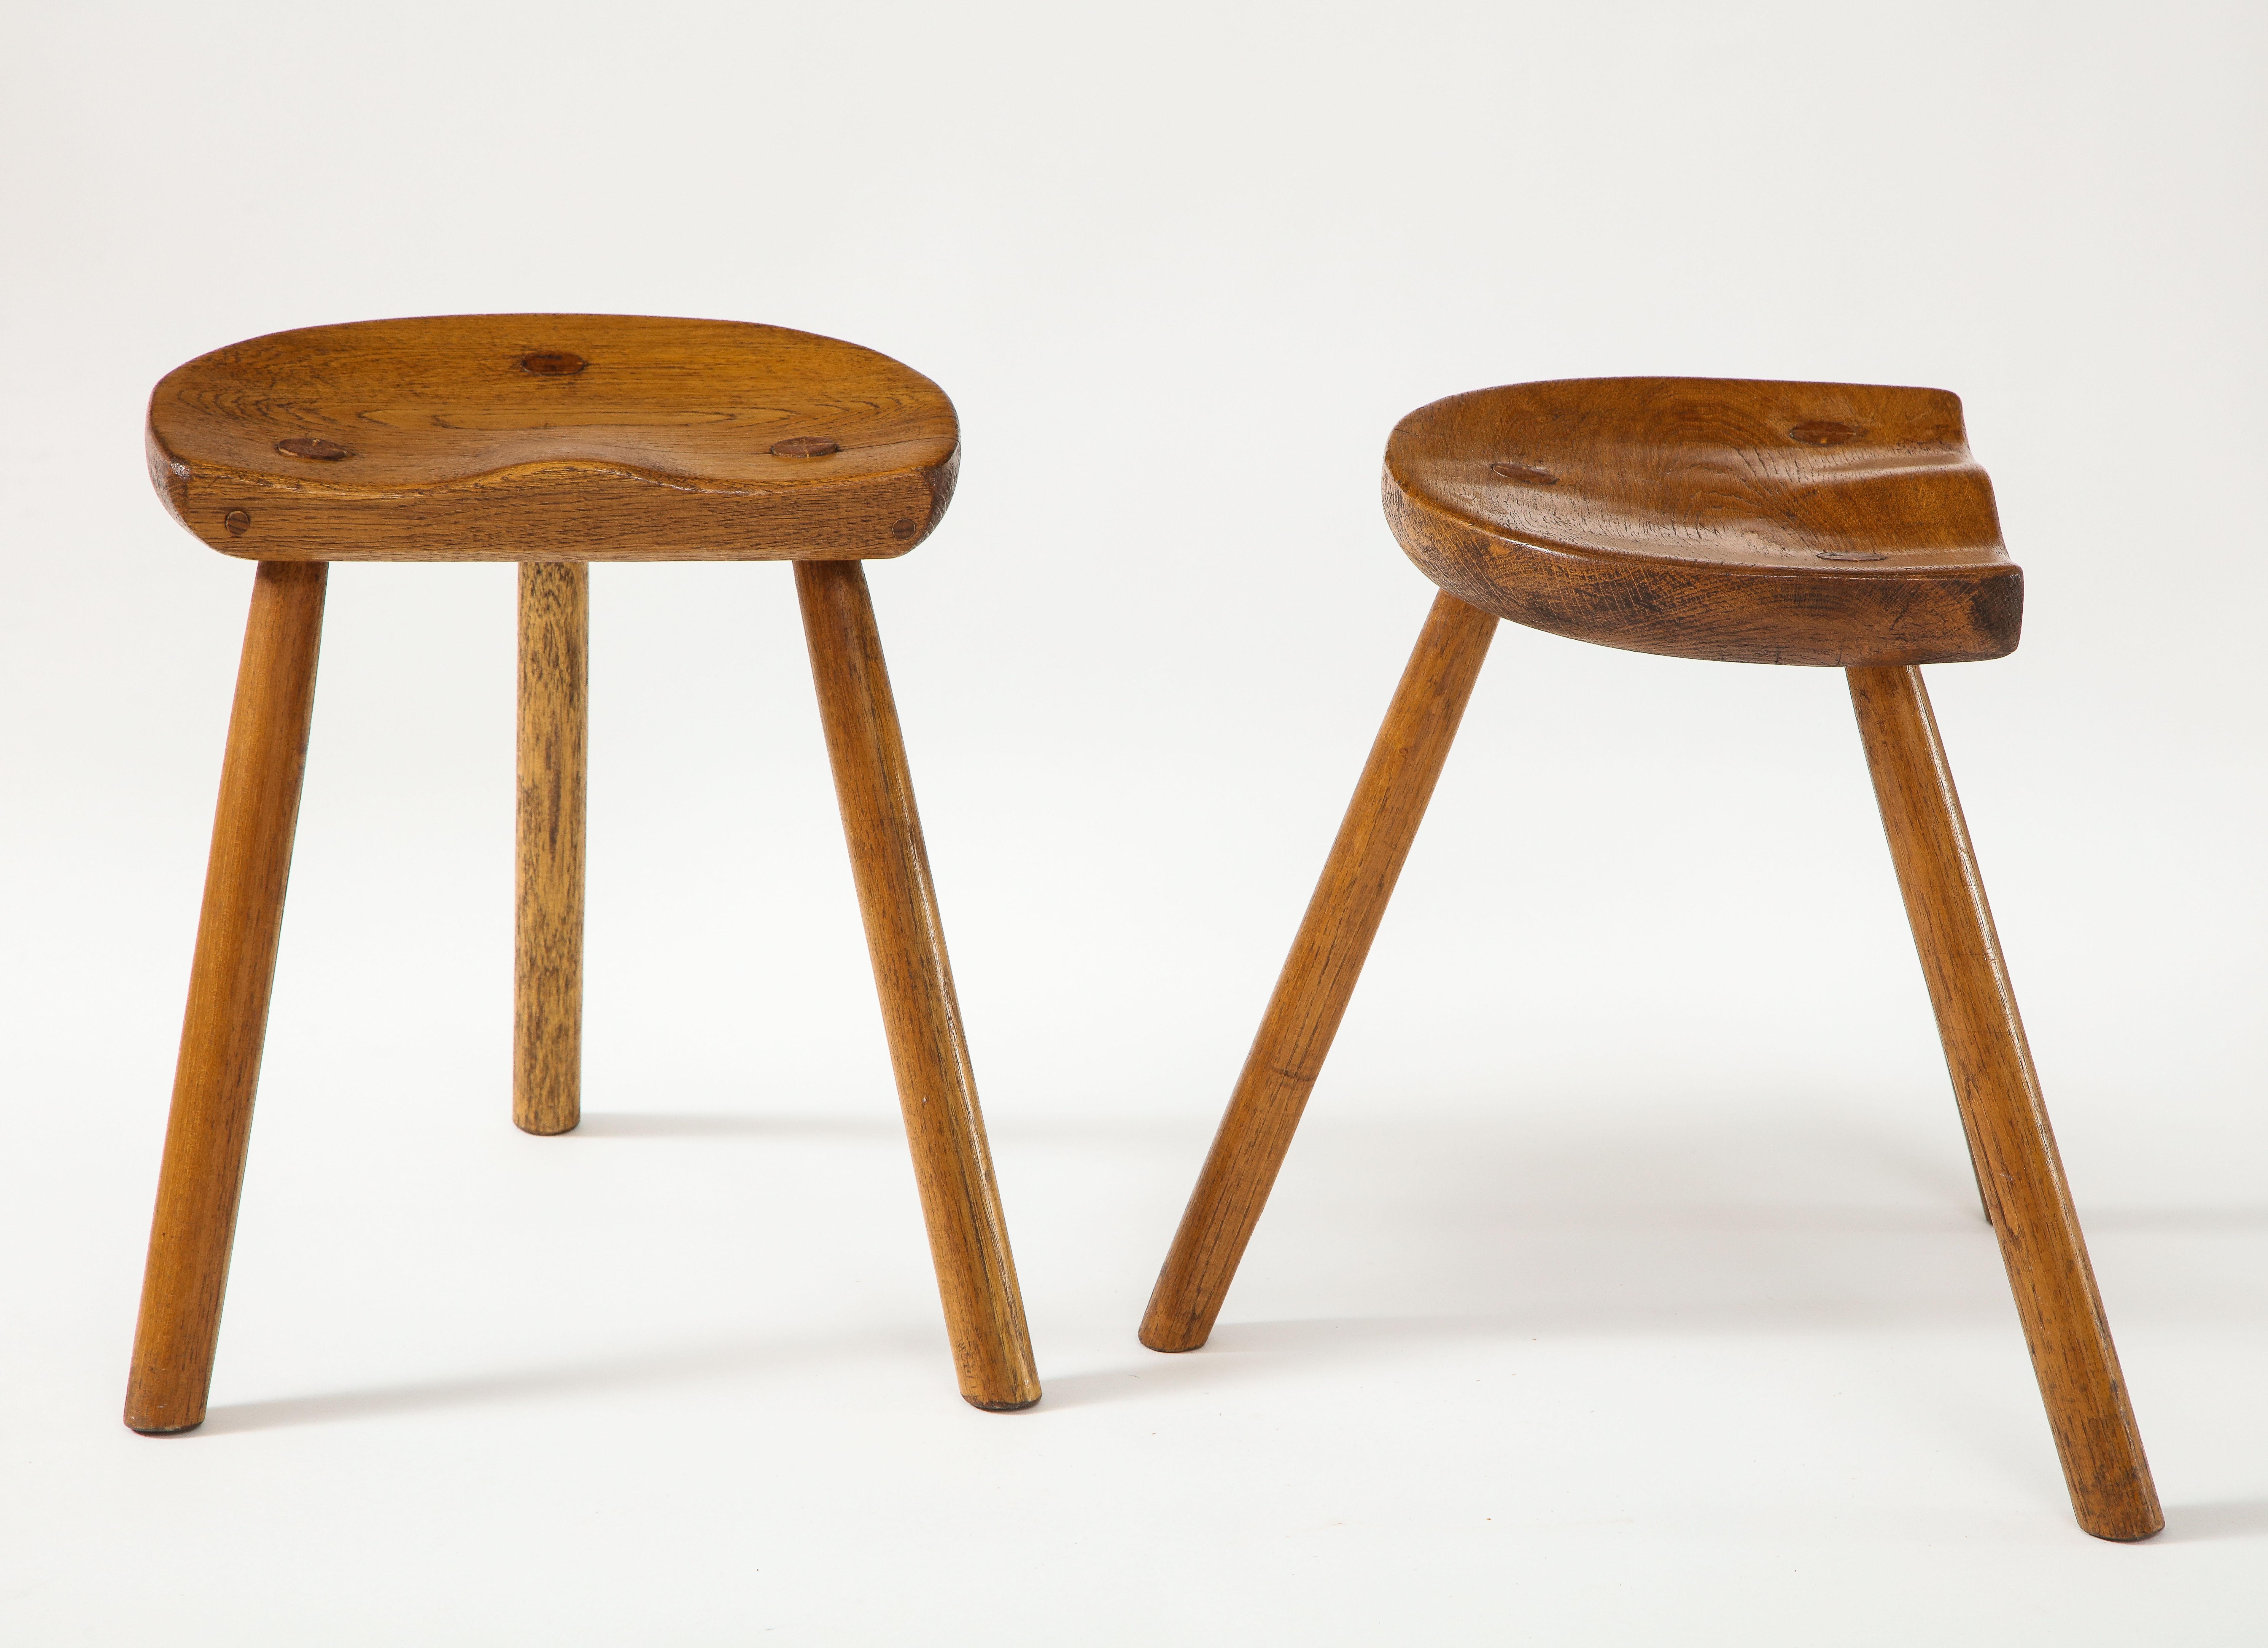 Hand-Crafted Pair of Scandinavian Tripod Stools, 1950's For Sale